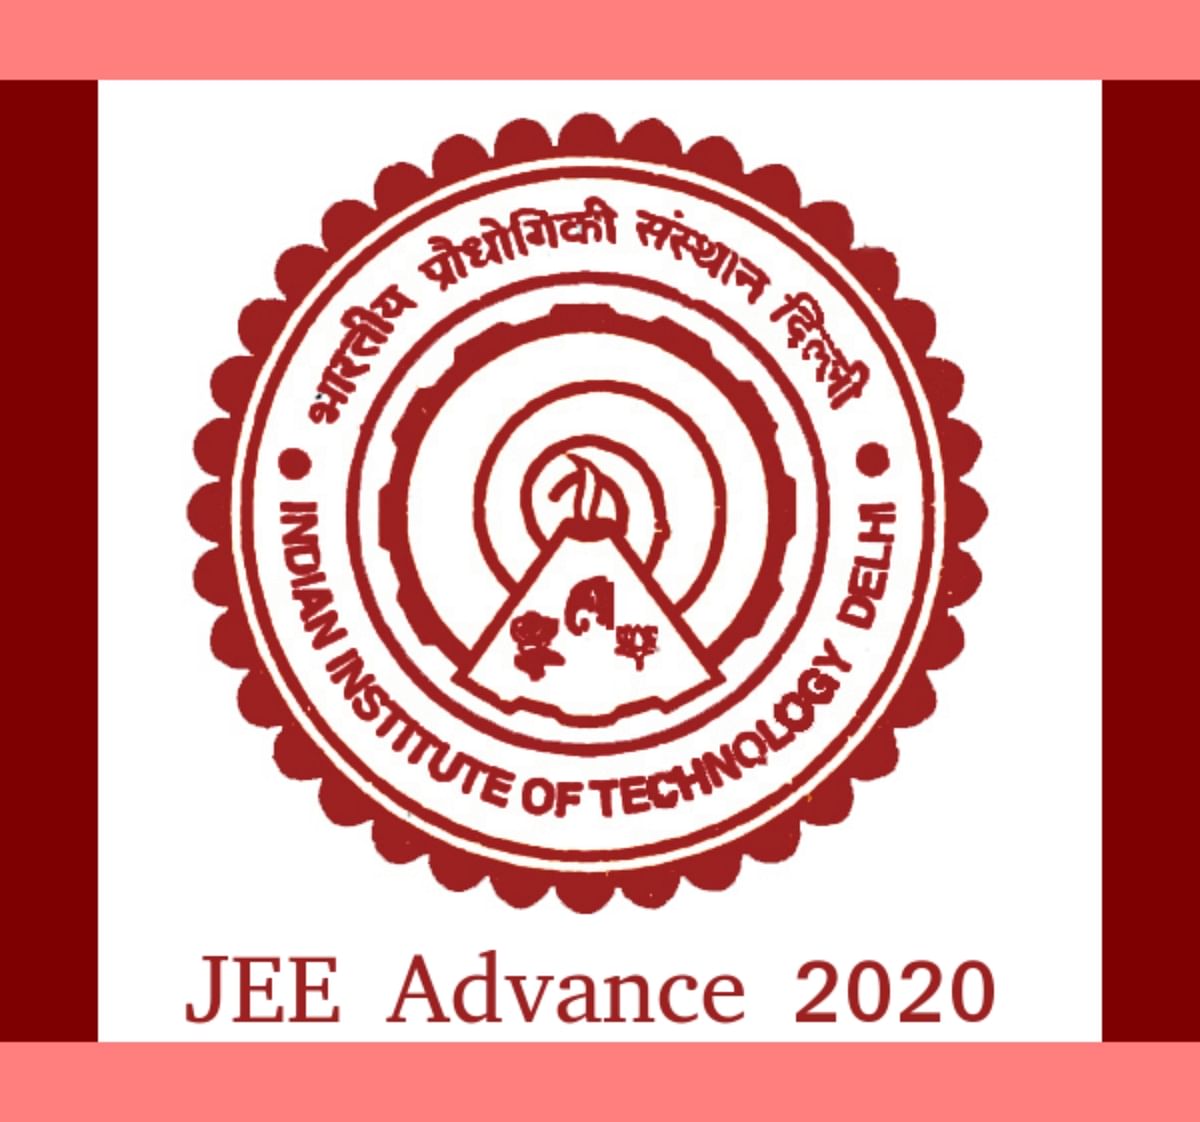 JEE Advanced 2020 Tentative Answer Key Released, Direct Link to Download Given Here